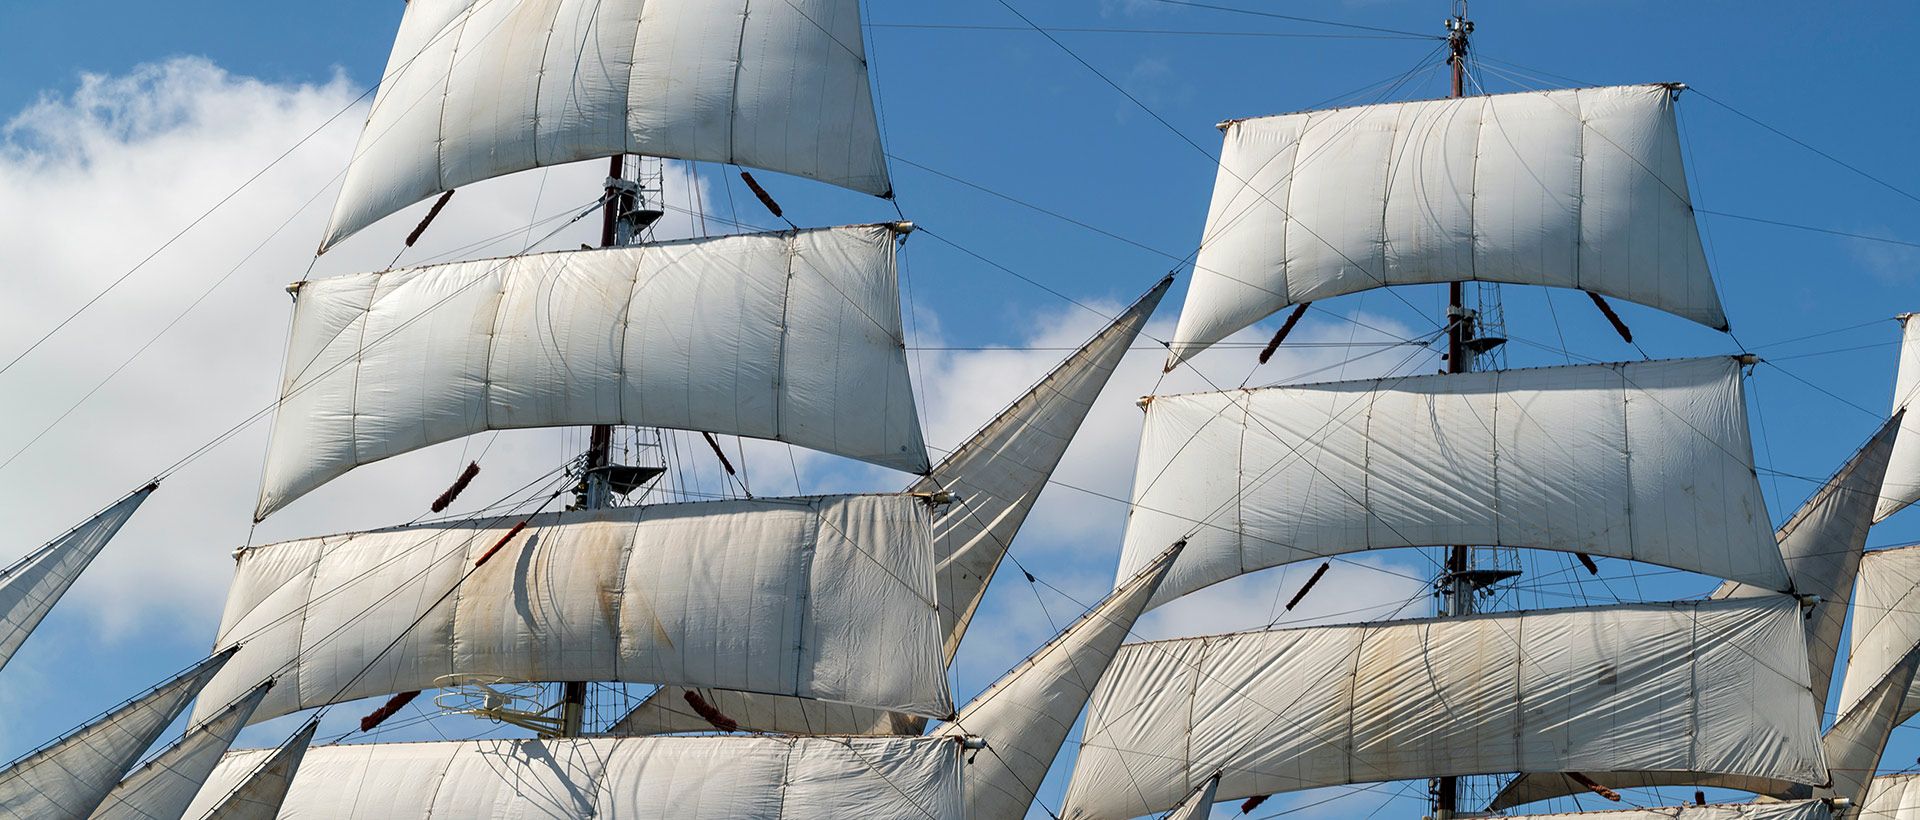 Camping Festival of Traditional Sailing Ships in Ploumanac’h